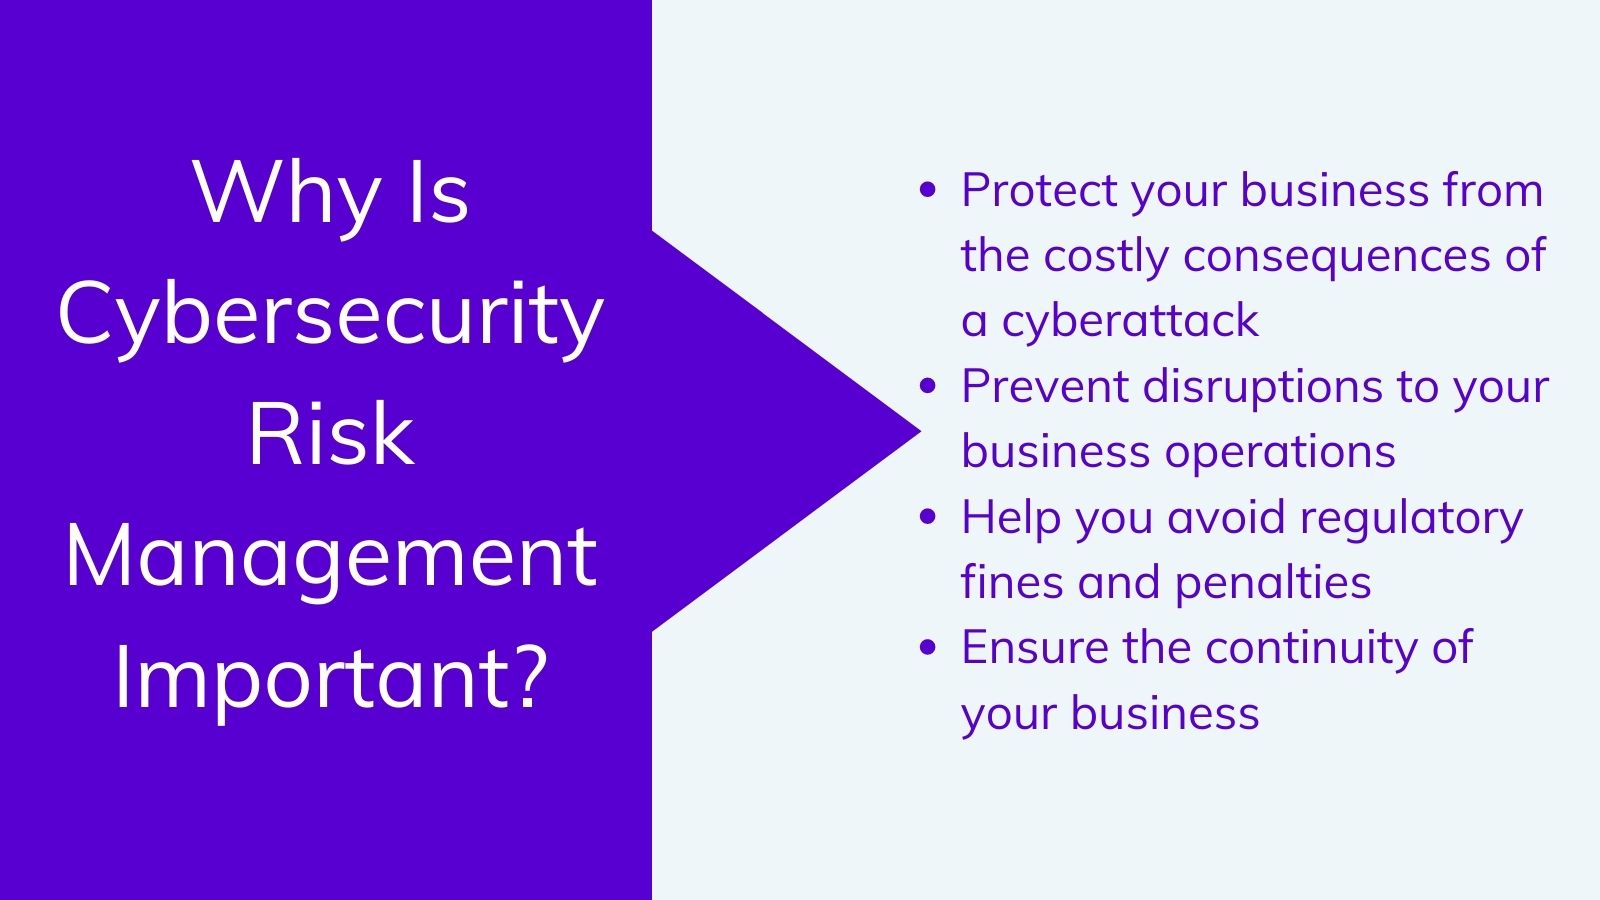 Why Is Cybersecurity Risk Management Important?